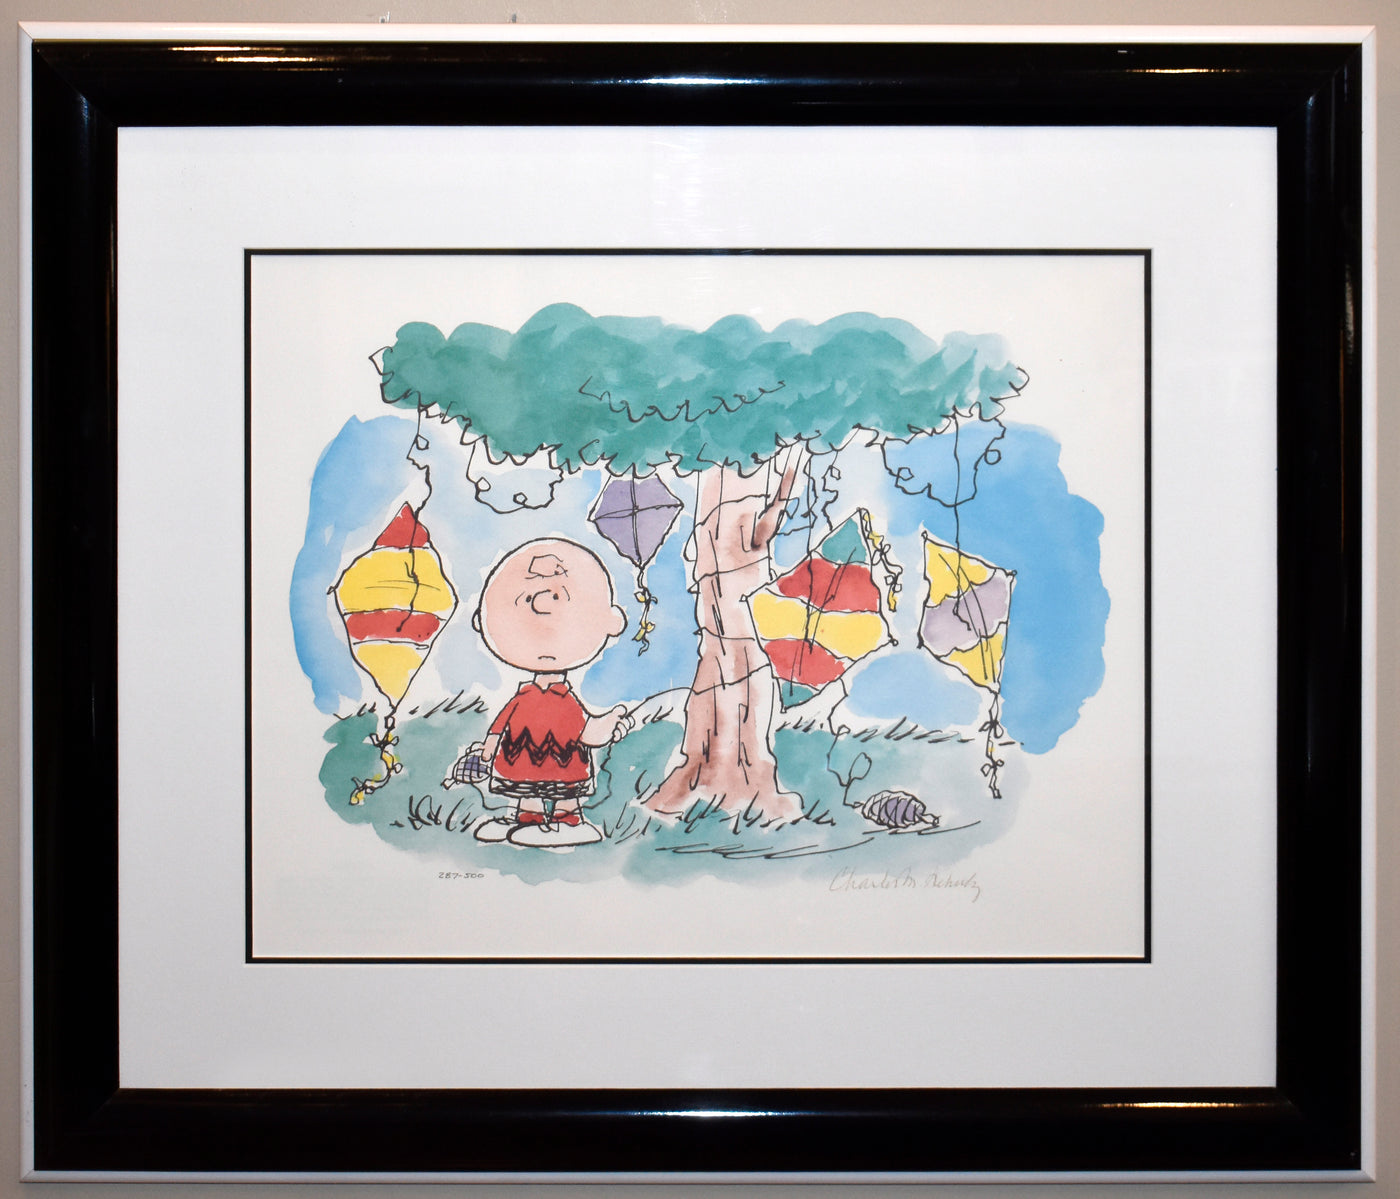 Charles Schulz Signed Lithograph, Good Grief